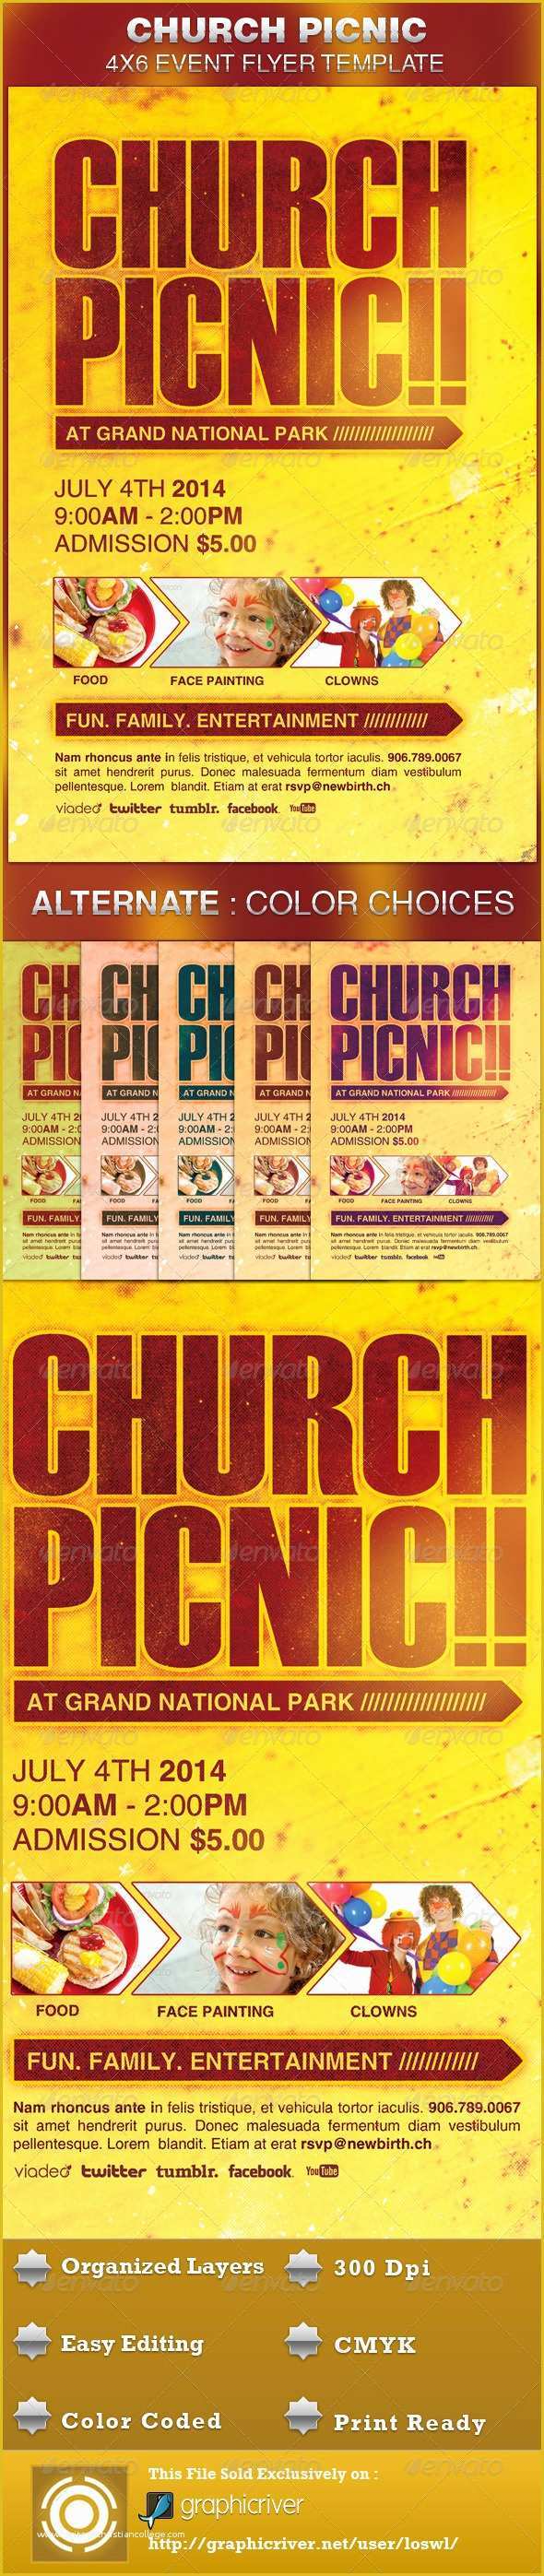 Free Church Picnic Flyer Templates Of Church Picnic Flyer Template by Loswl